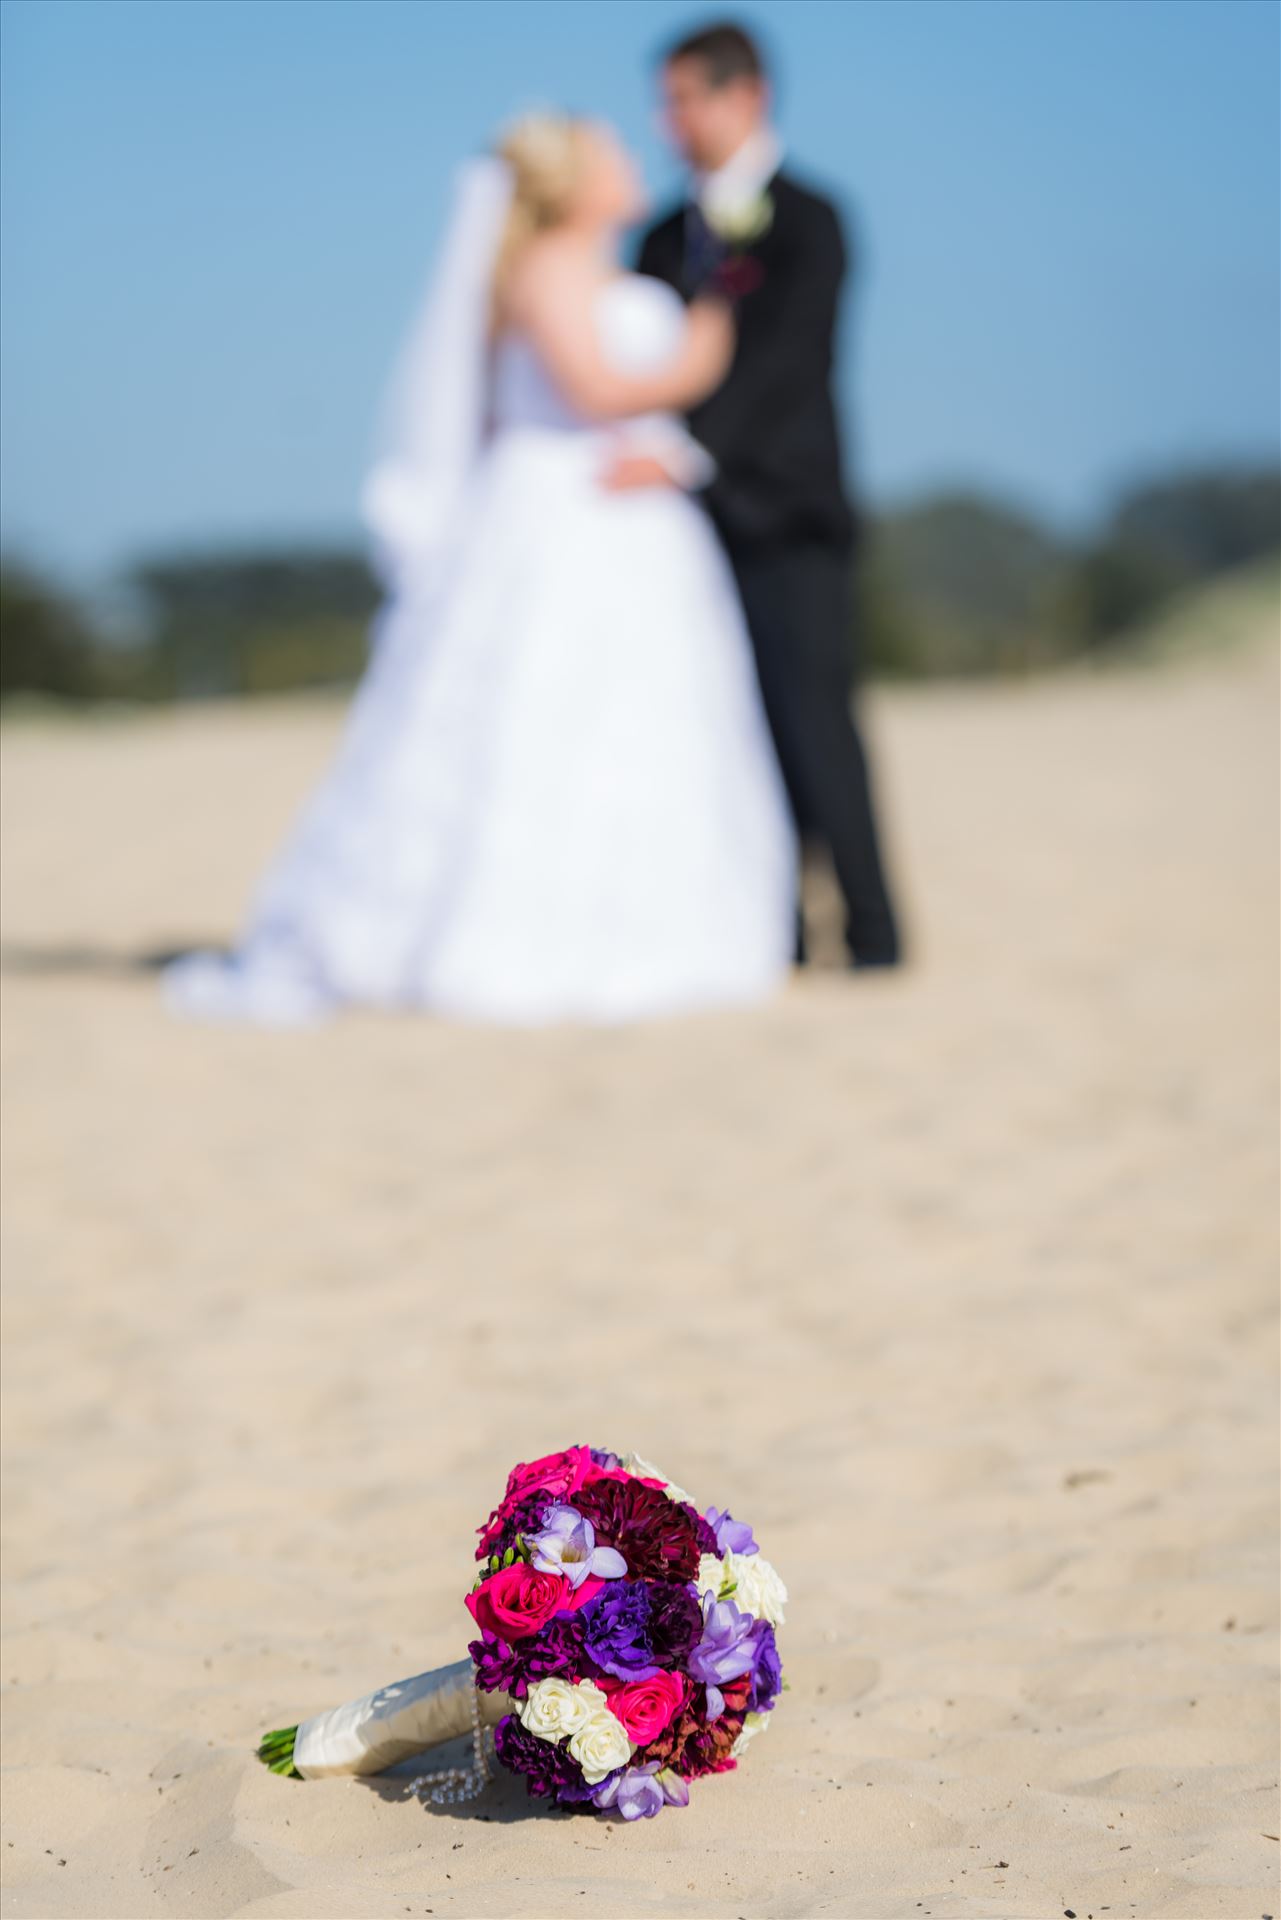 Jessica and Michael 03 - Sea Venture Resort and Spa Wedding Photography by Mirror's Edge Photography in Pismo Beach, California. Flowers on the Beach with Bride and Groom by Sarah Williams